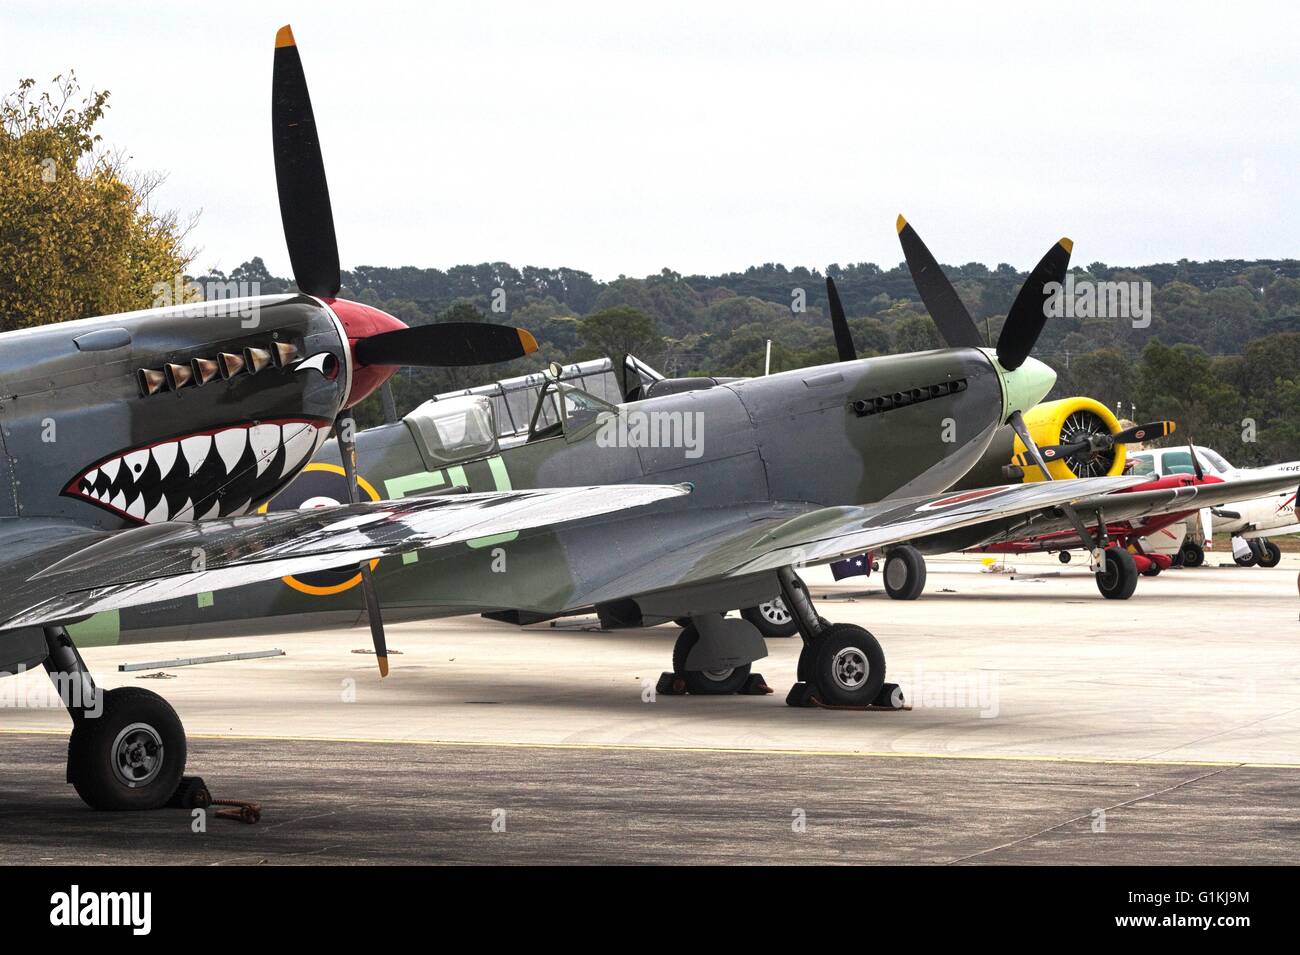 Supermarine Spitfire Mk.VIII with shark face painted on the front and Supermarine Spitfire Mk.XVI in the background, Tyabb. Stock Photo